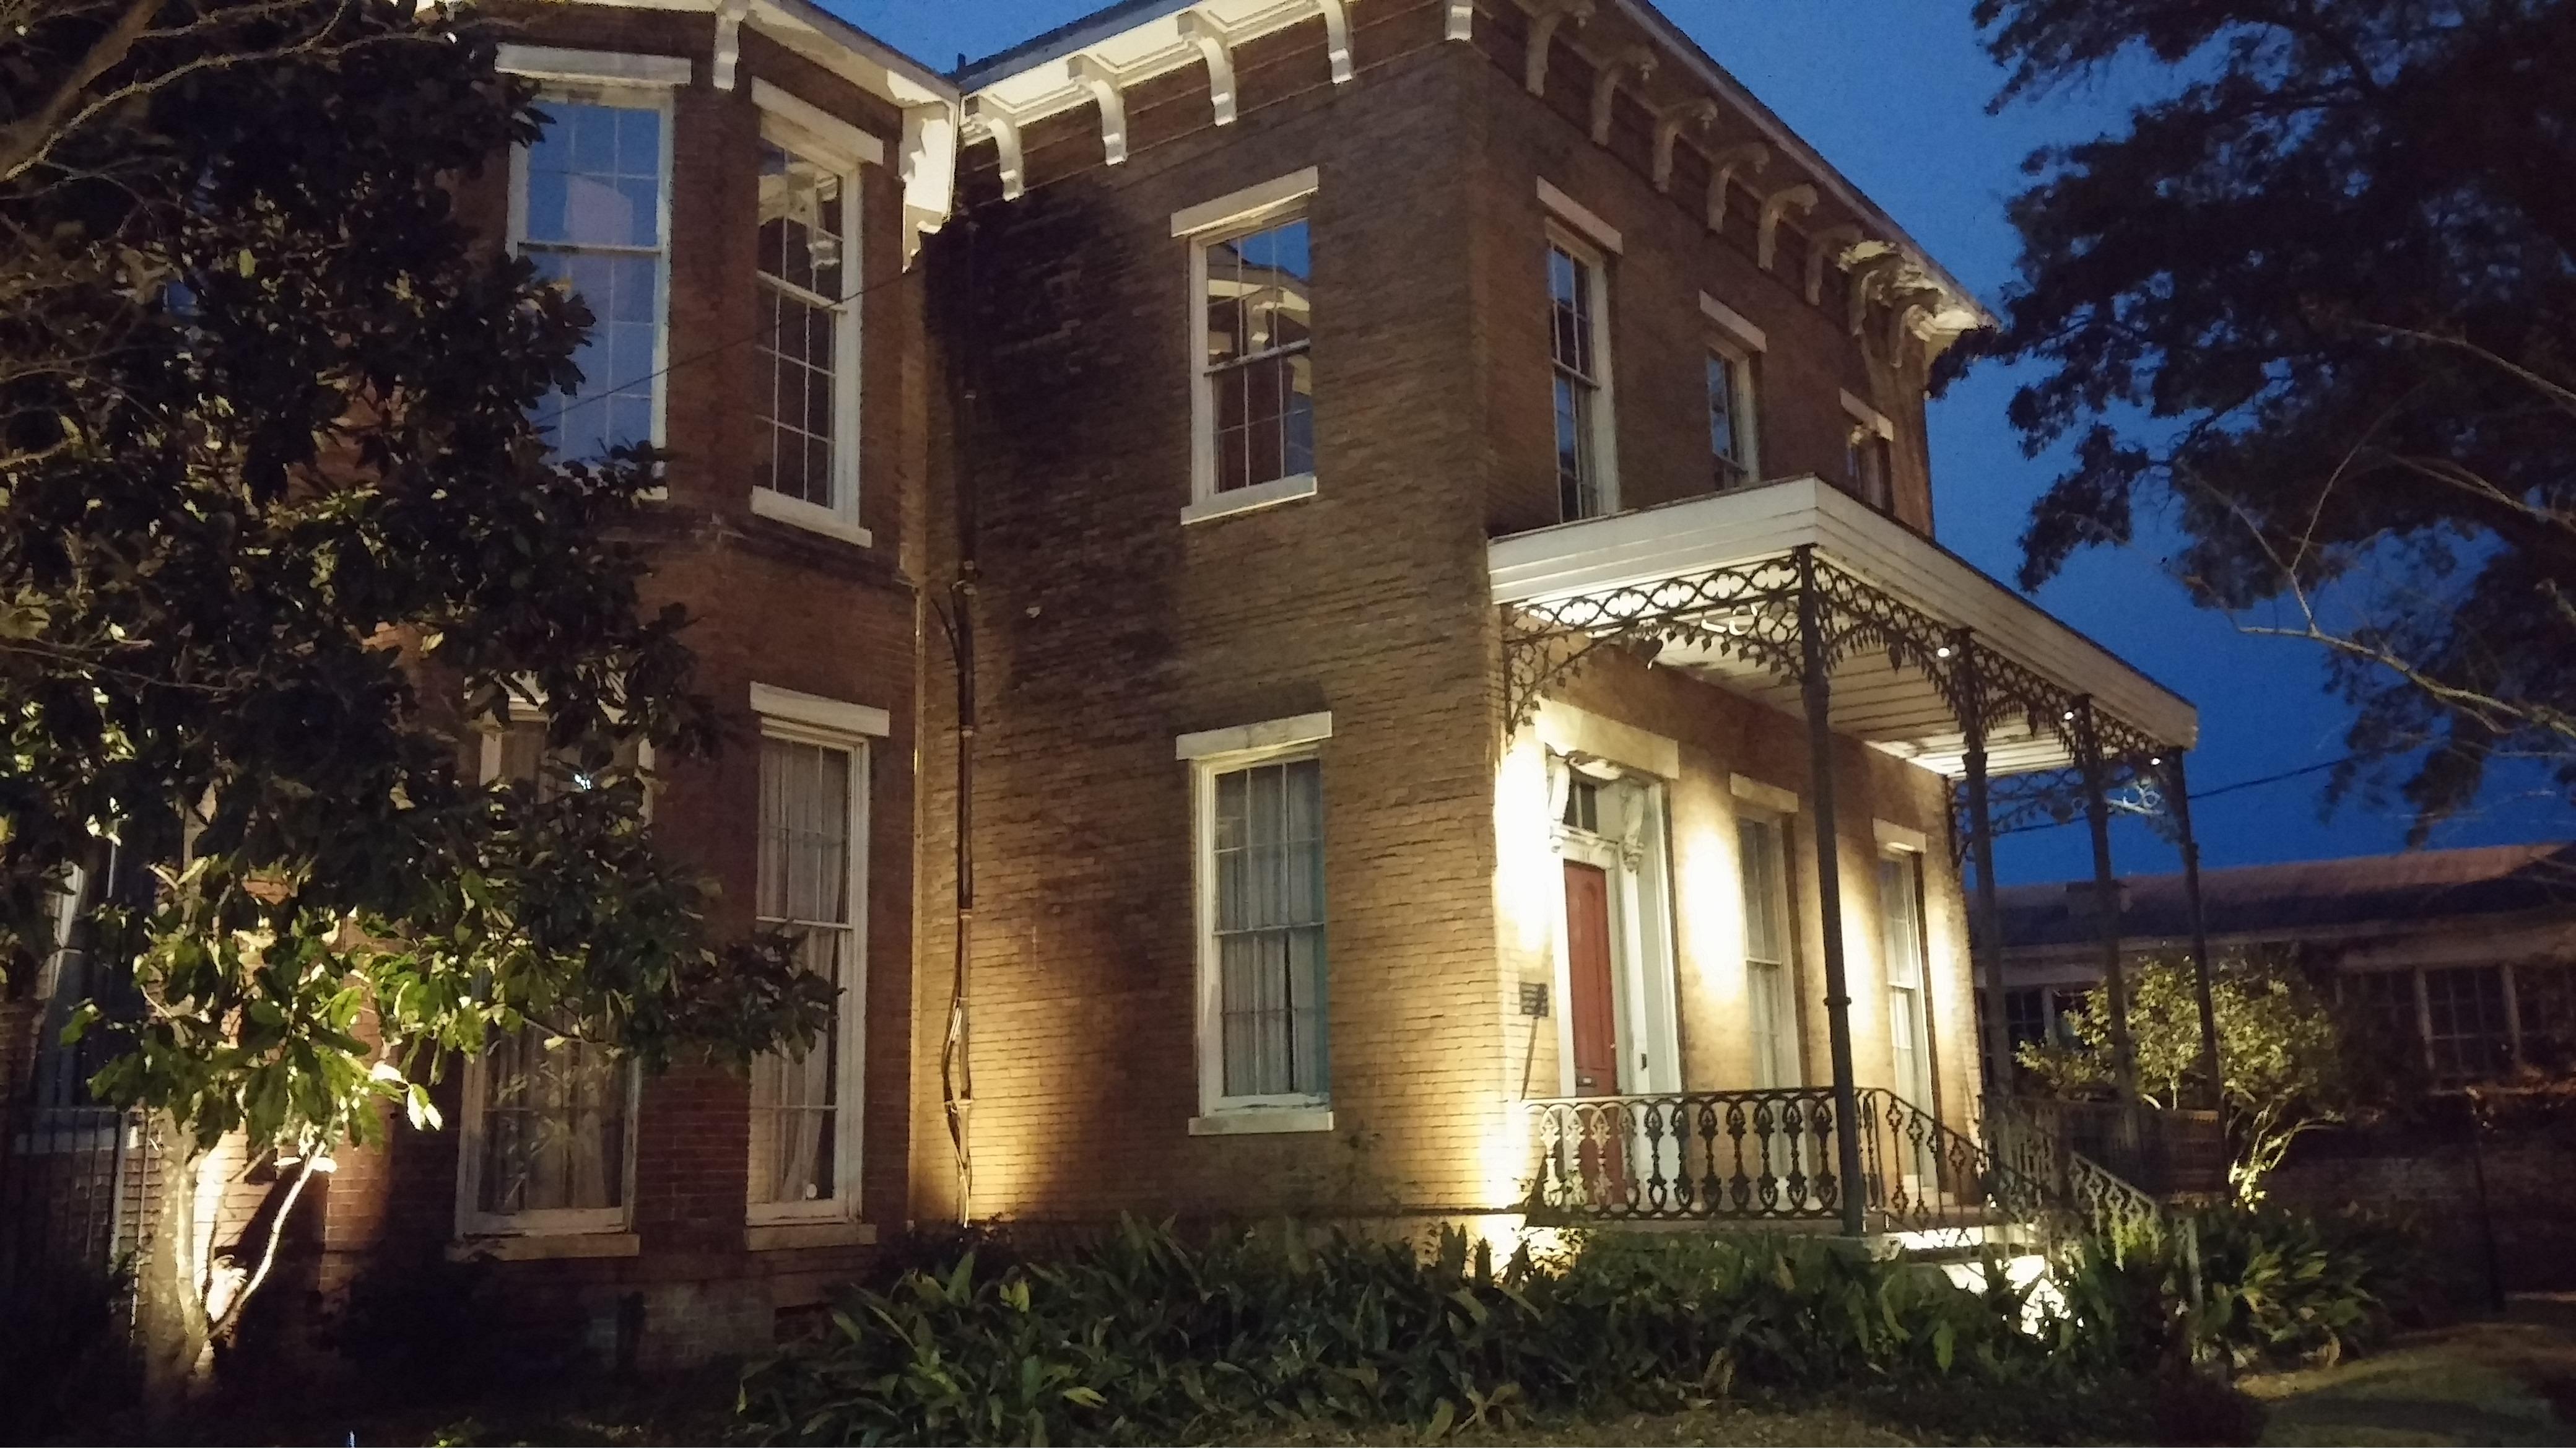 Landscape Lighting in Historic Downtown Mobile, Alabama  - installed by JubileeScape